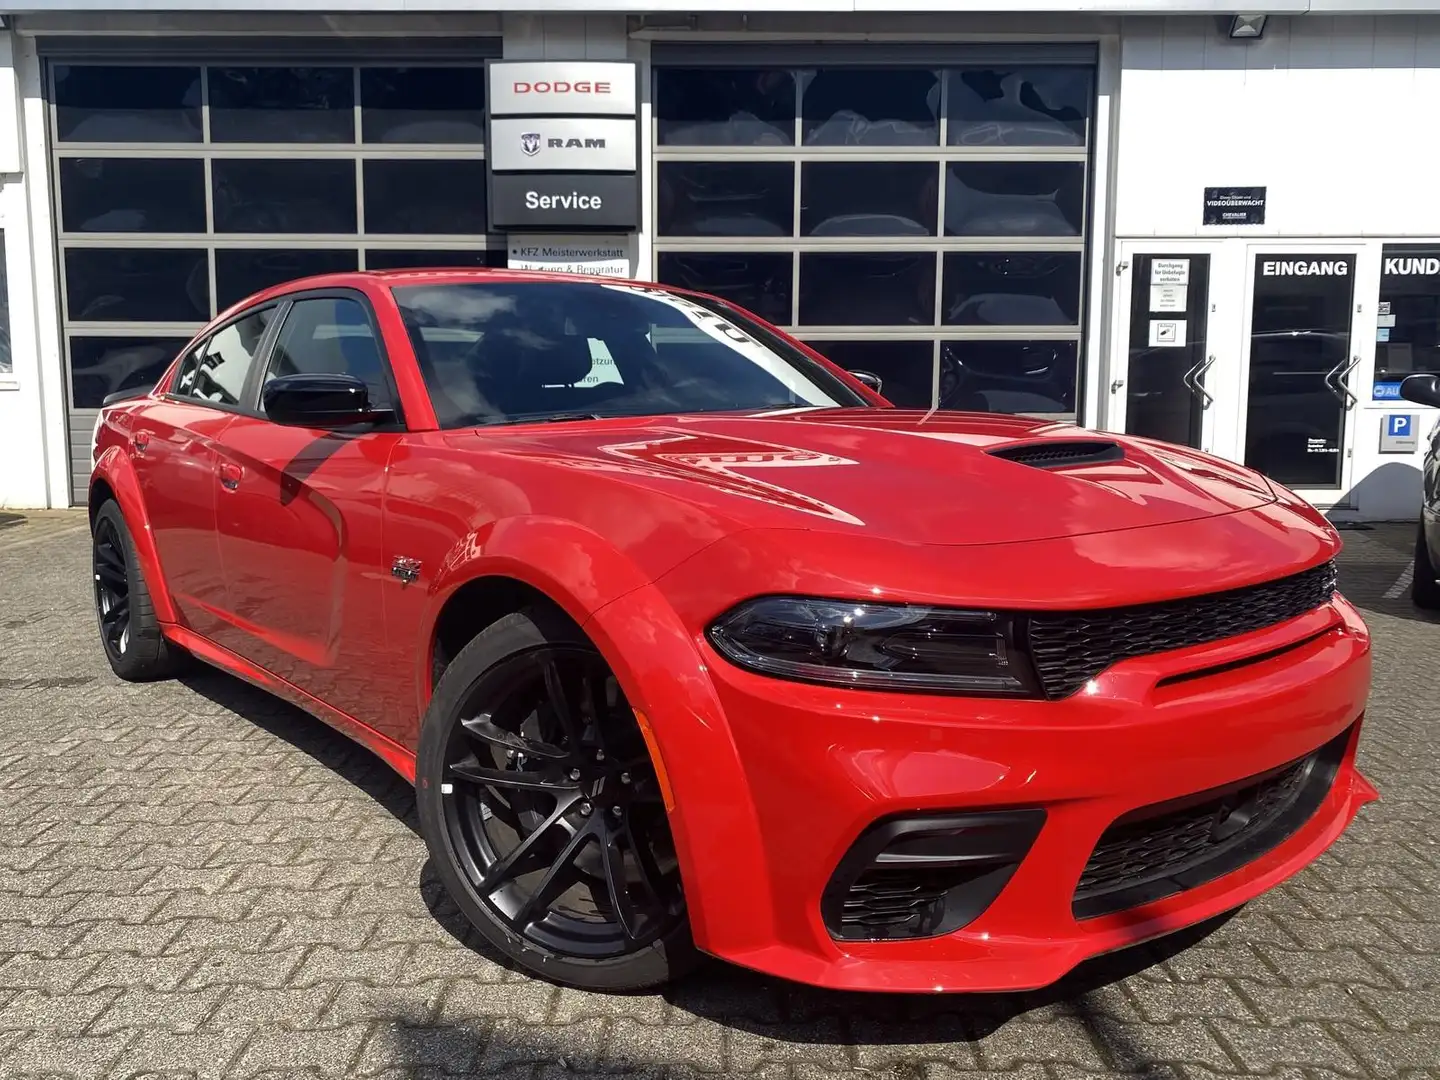 Dodge Charger R/T Scat Pack Widebody Last Call Red - 2